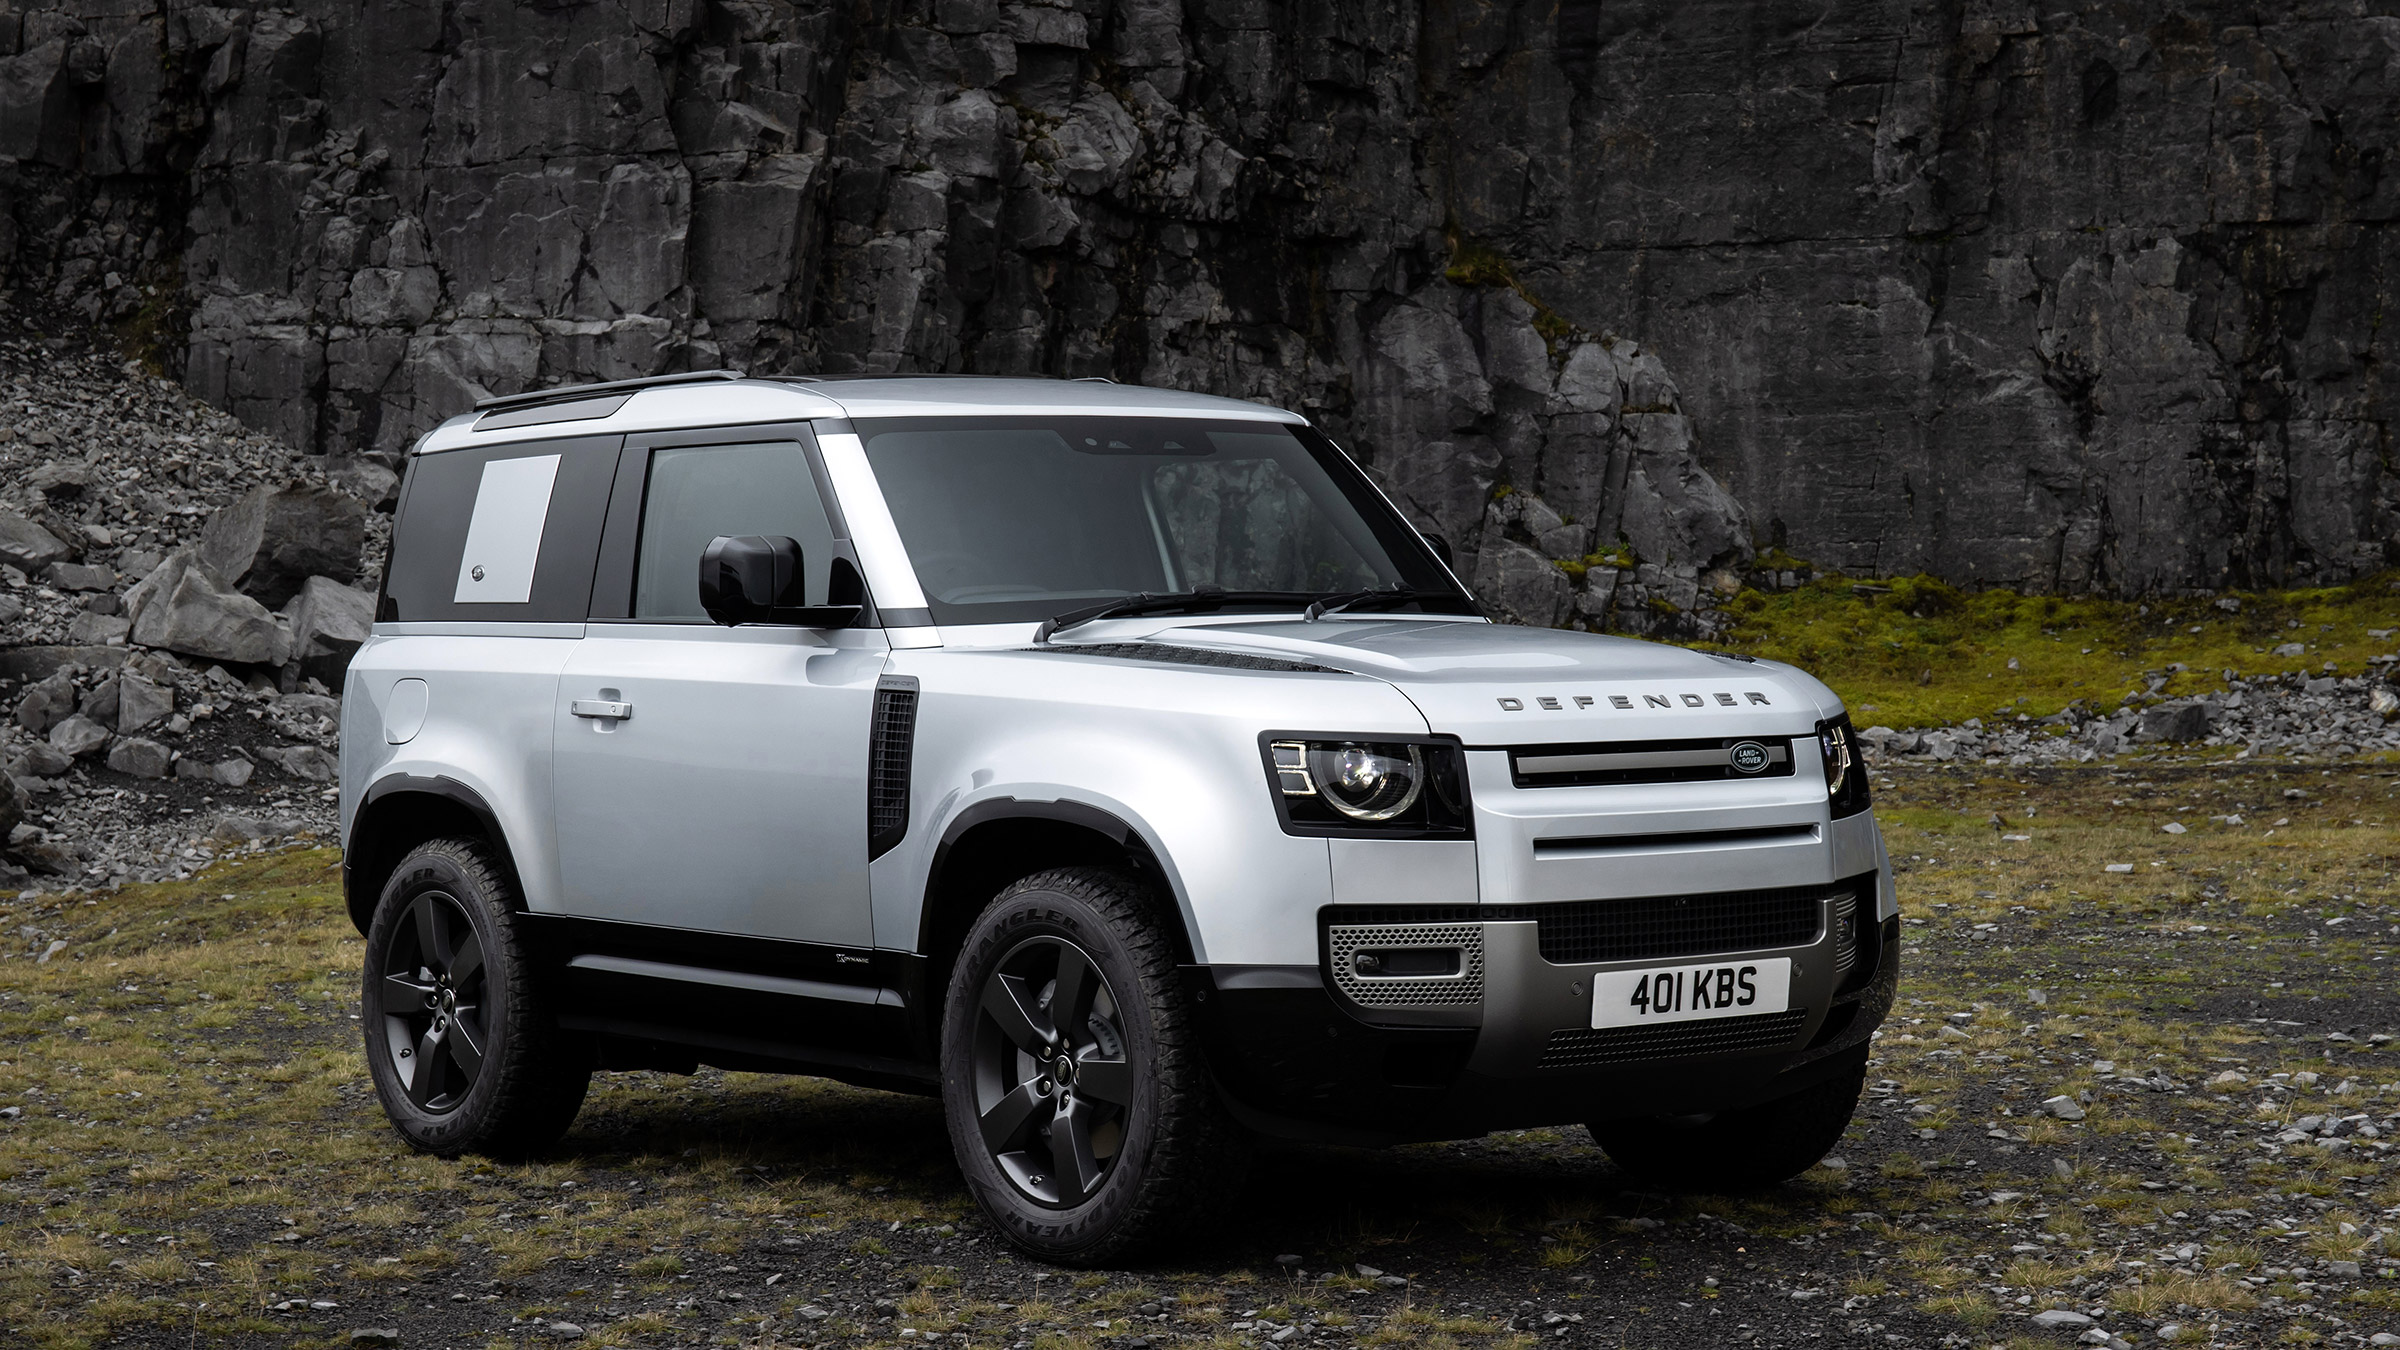 2020 Land Rover Defender: The King of the Mountain is Back - The Car Guide